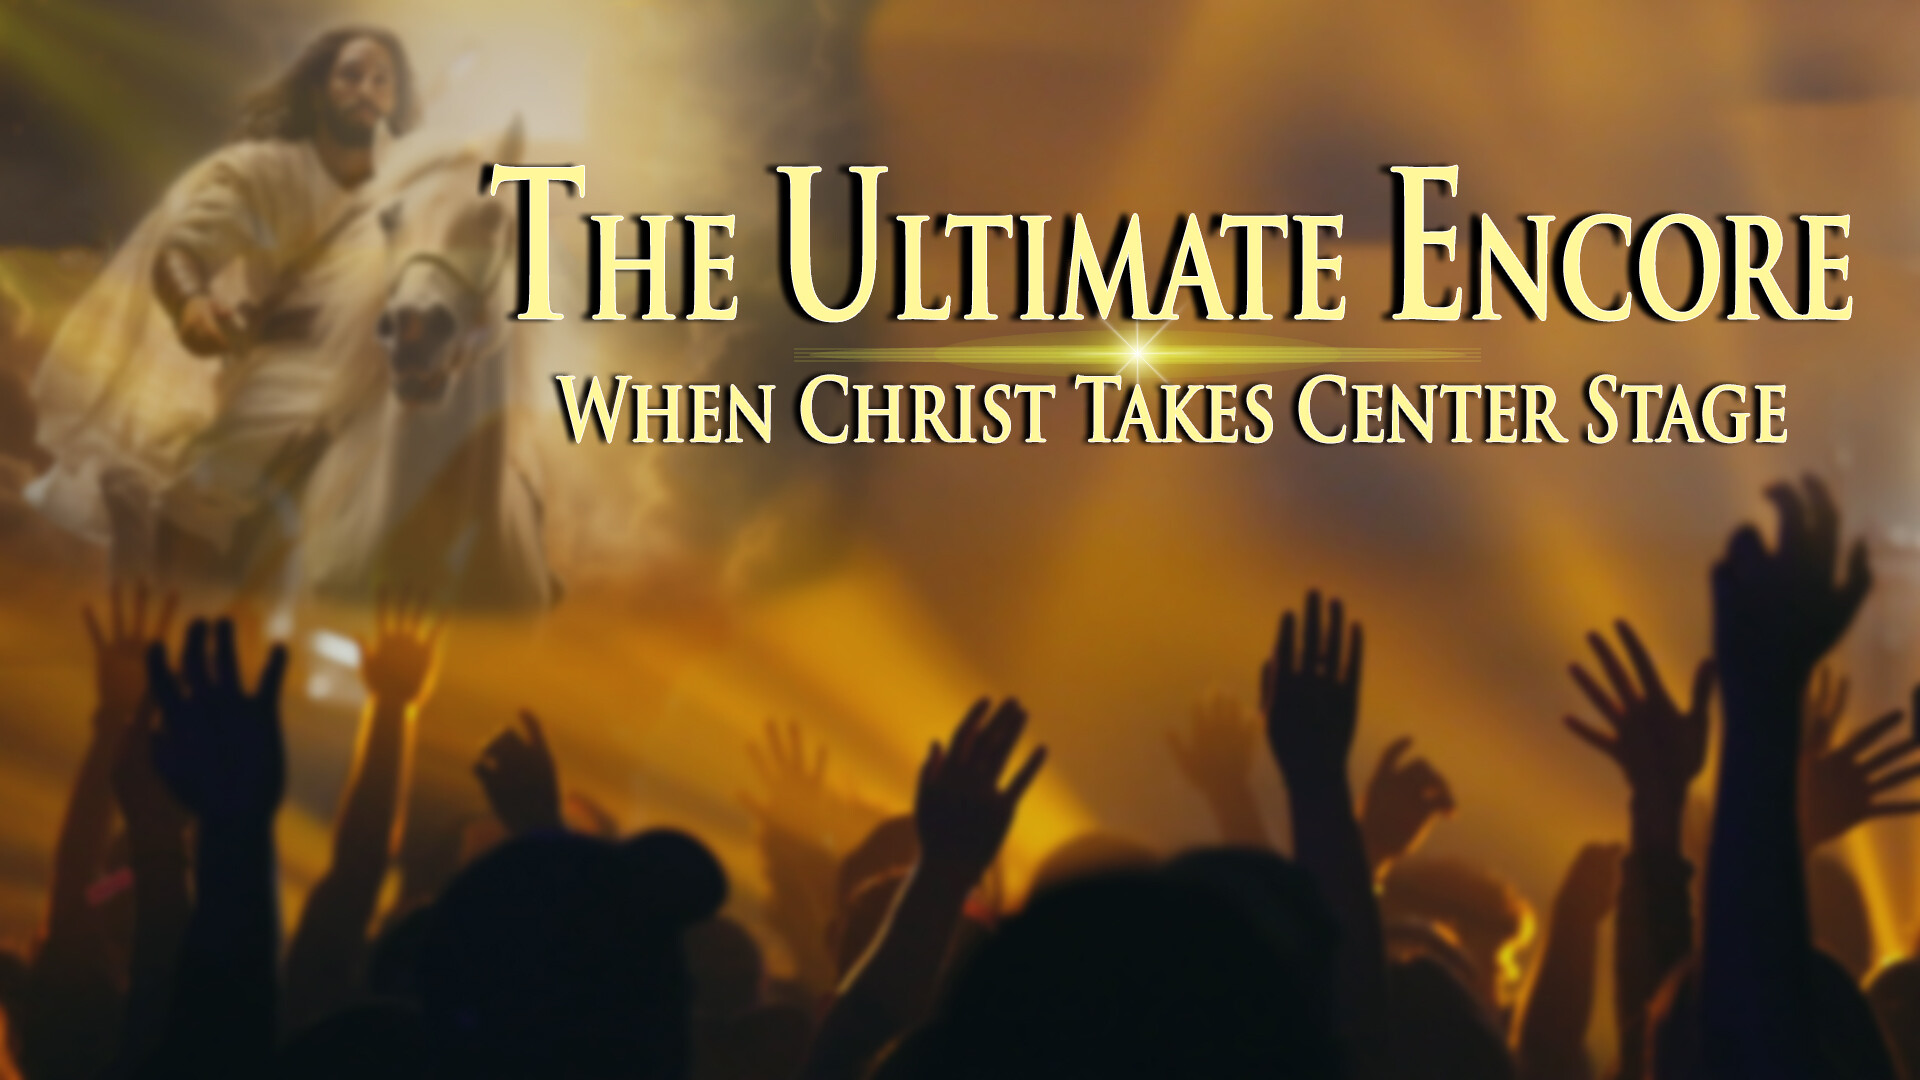 From Rapture to Return: The Ultimate Paradigm Shift